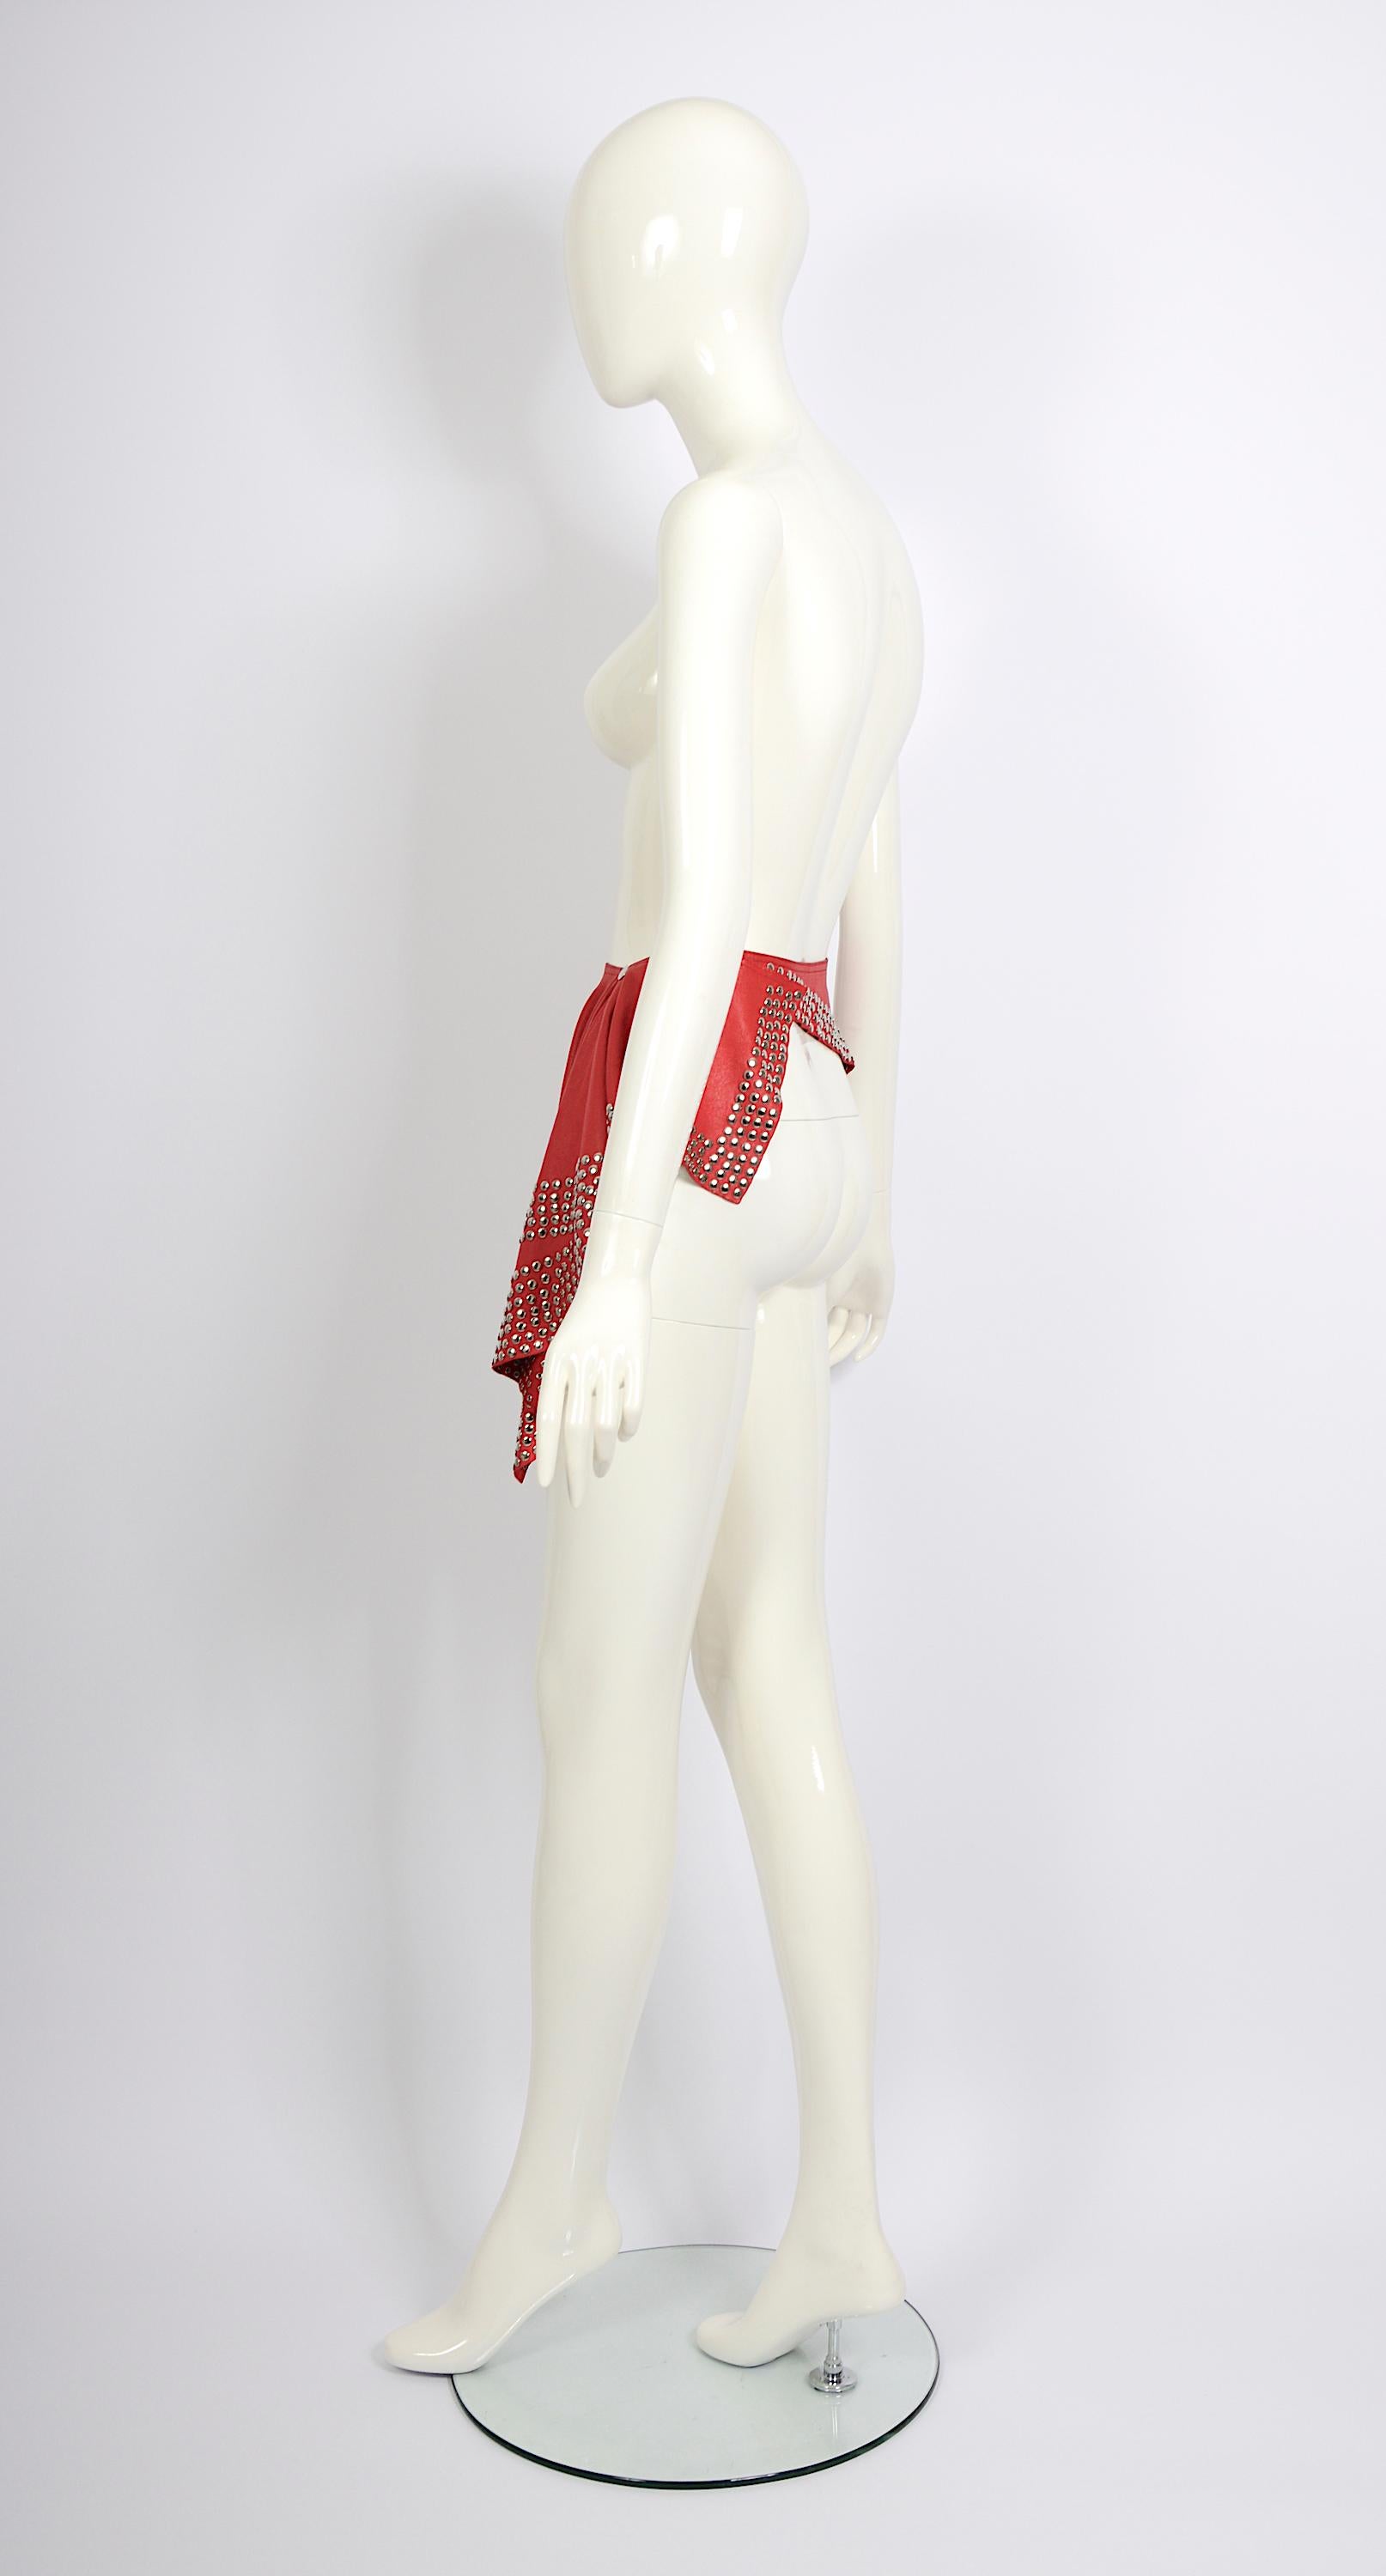 Azzedine Alaia circa 1981 collectors studded embellished red leather belt skirt For Sale 5